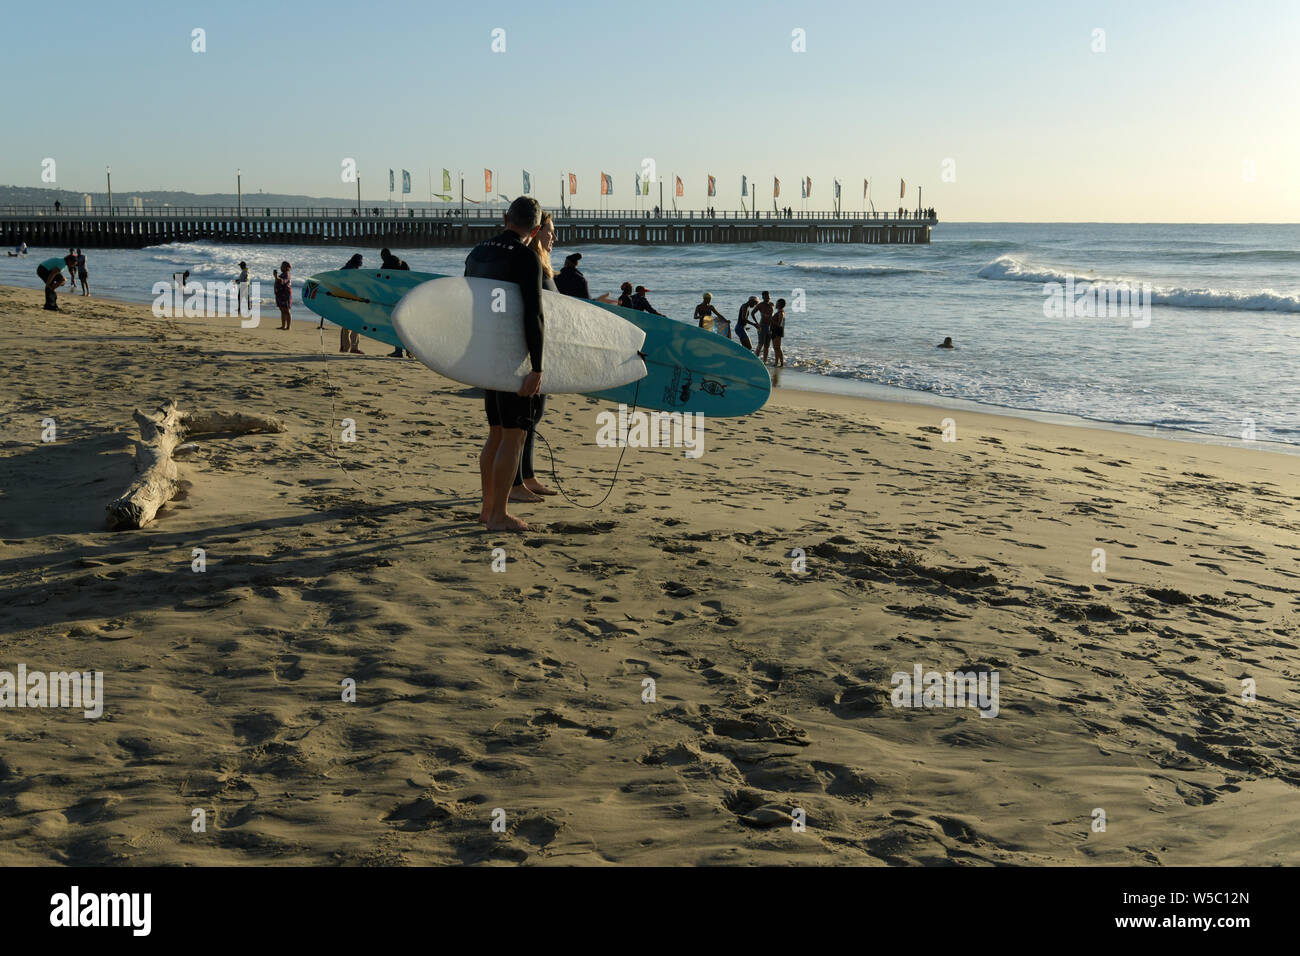 Durban, KwaZulu-Natal, South Africa, man and woman with surf boards standing on beach, surfers, surfing, landscape, lifestyle, candid, sport Stock Photo